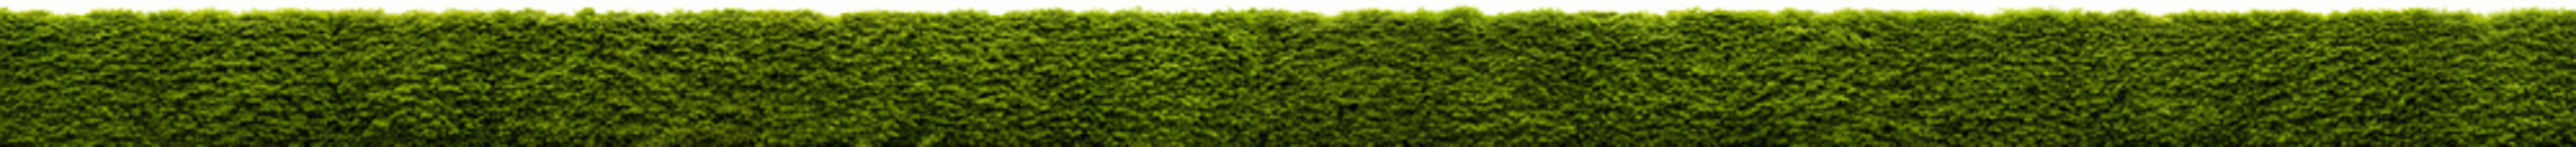 Isolated very long hedge | Hi resolution | 13.000 x 900 px